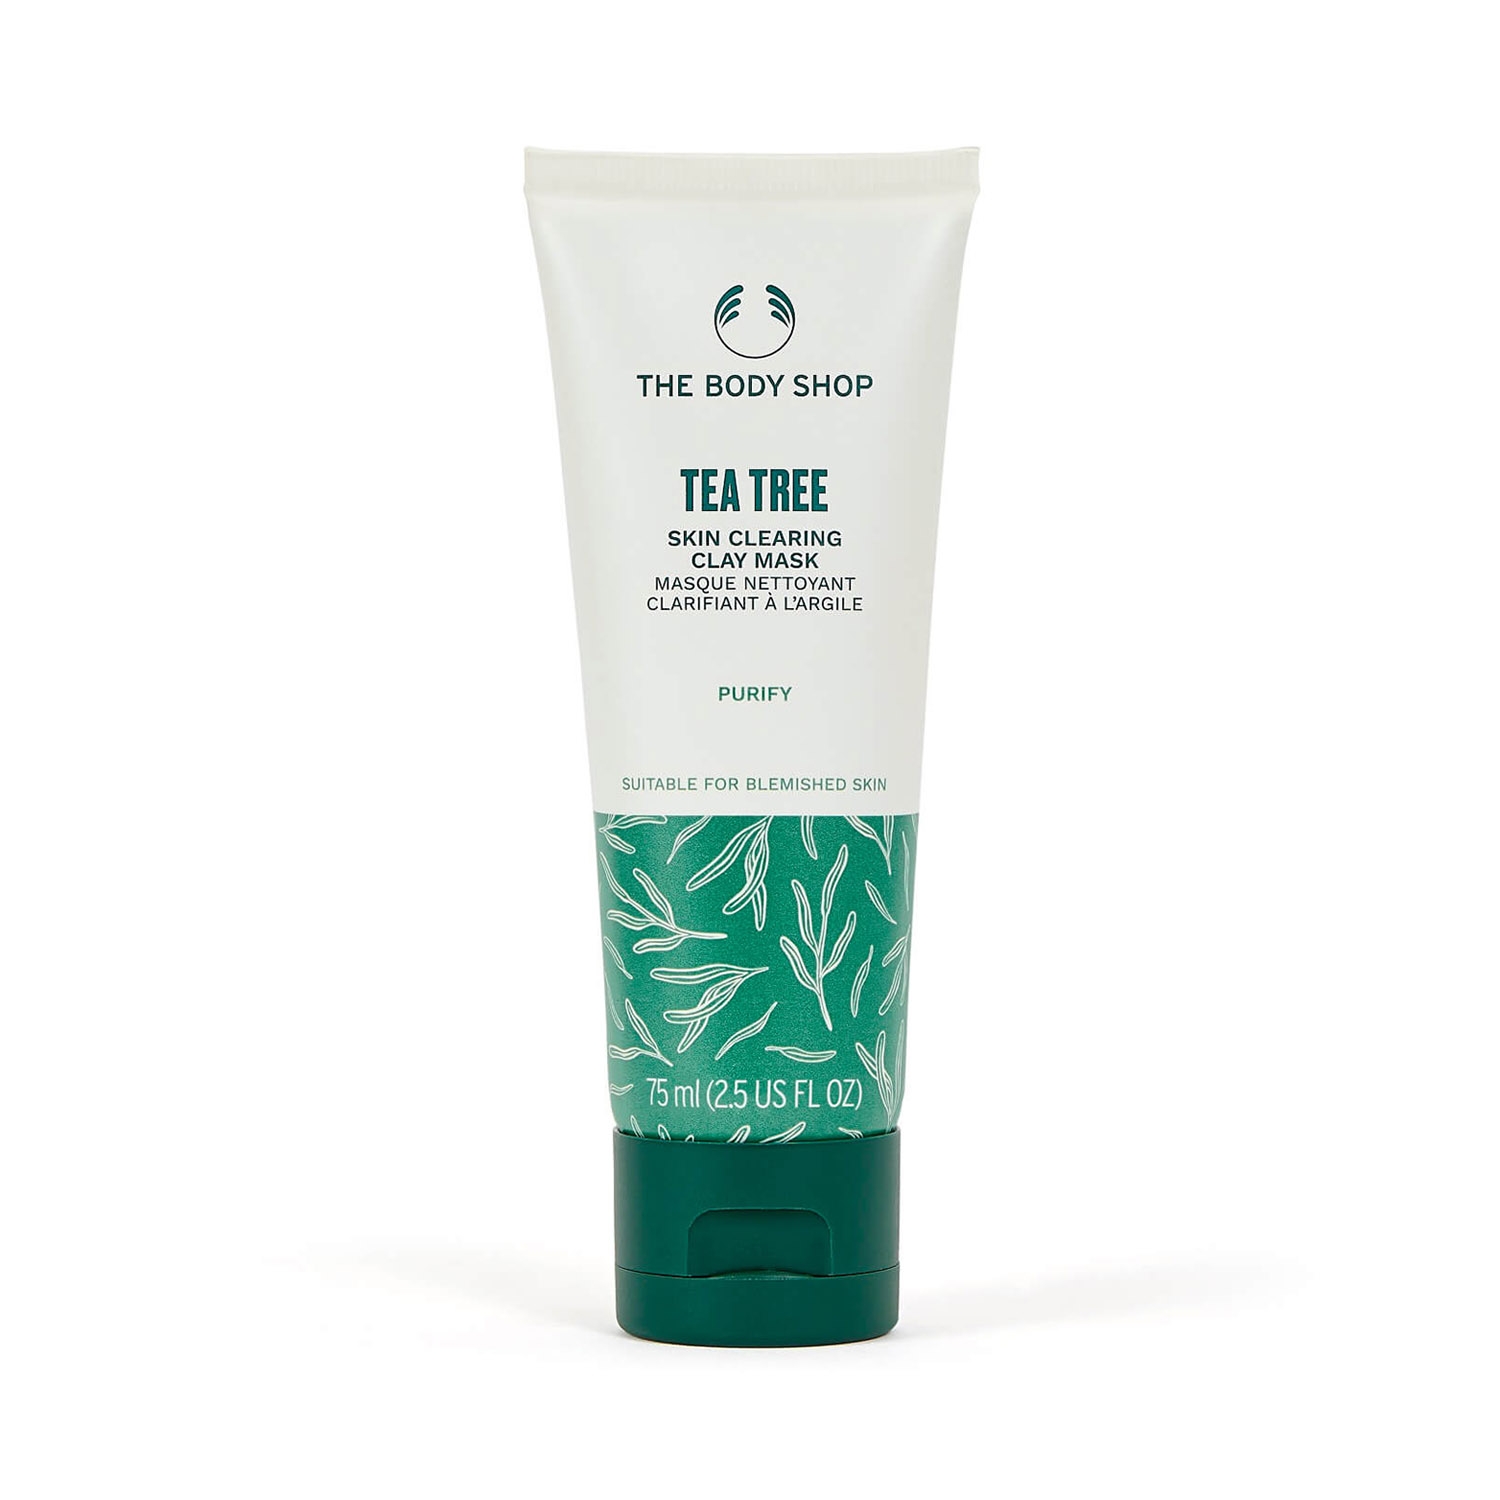 The Body Shop | The Body Shop Tea Tree Skin Clearing Clay Mask (75ml)